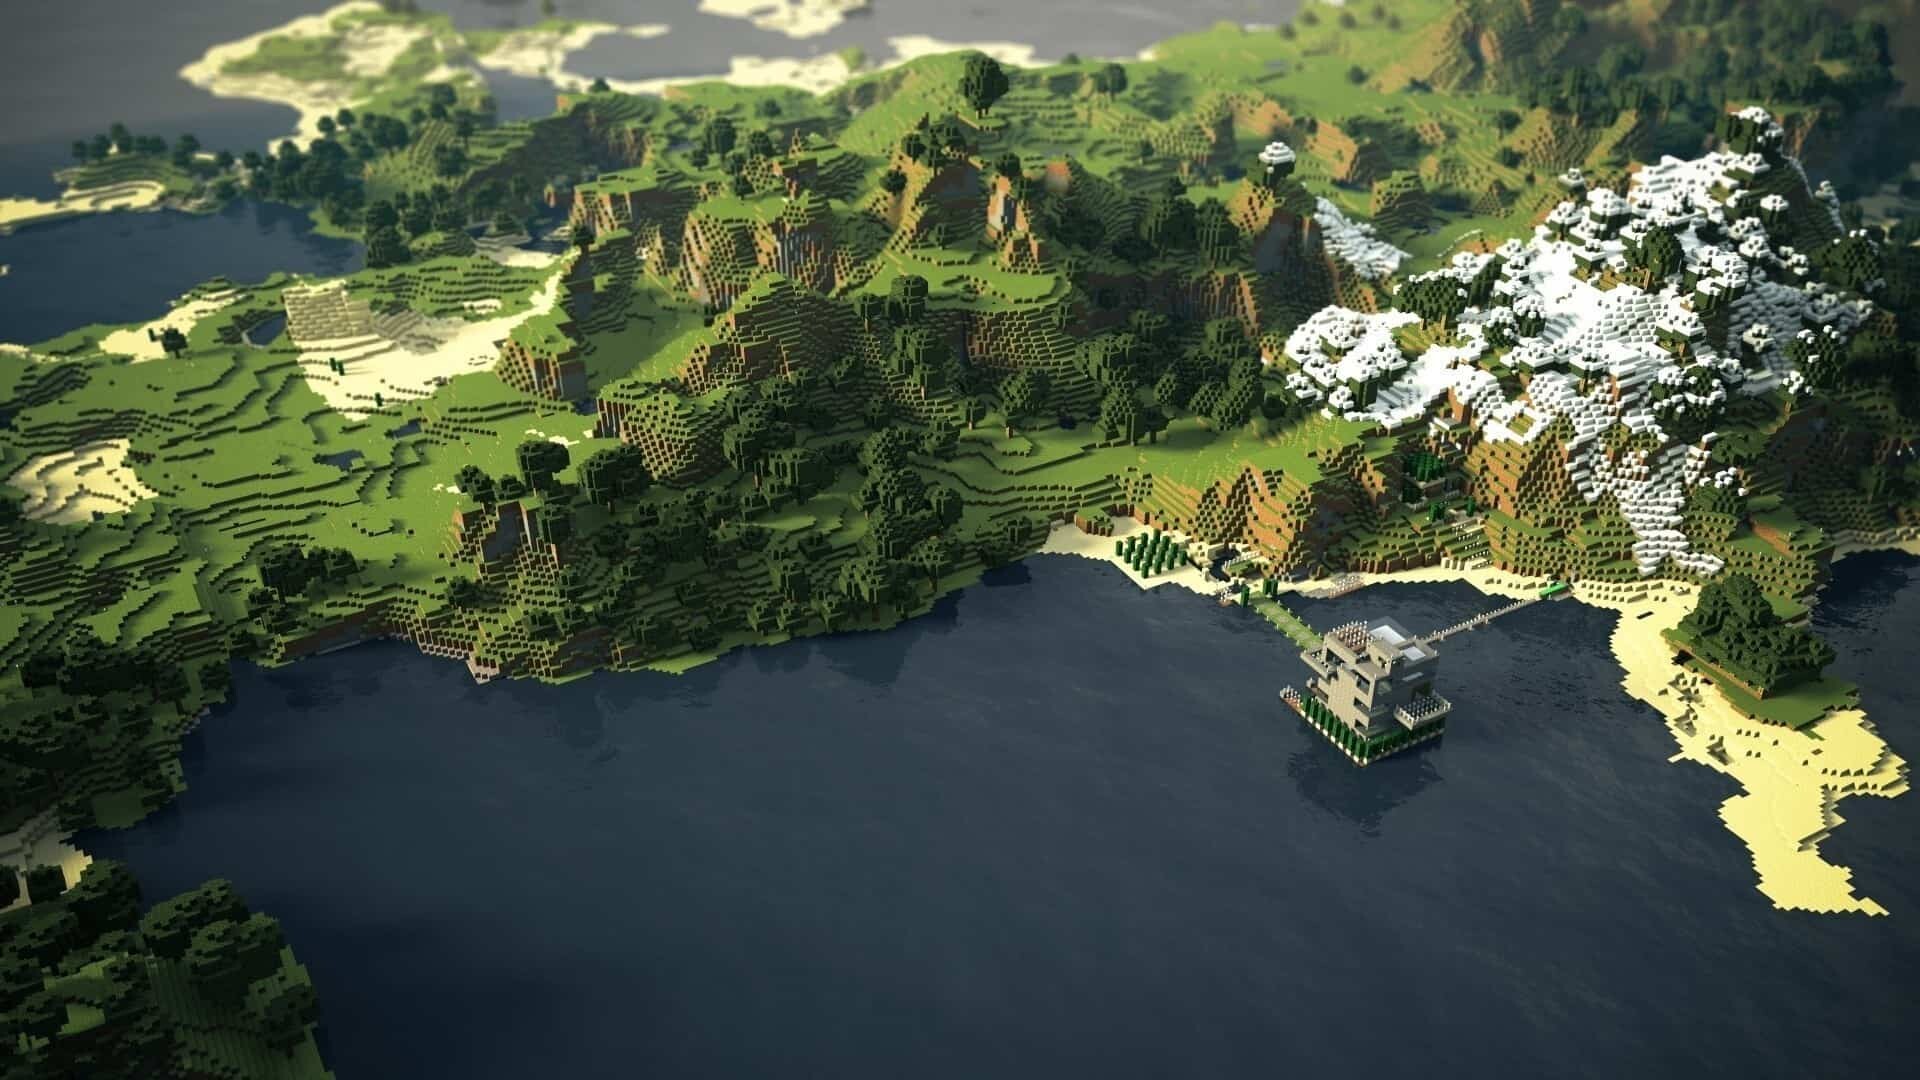 Minecraft: If a player dies in a hardcore world, they are no longer allowed to interact with it, so they can either be put into spectator mode and explore the world or delete it entirely. 1920x1080 Full HD Wallpaper.